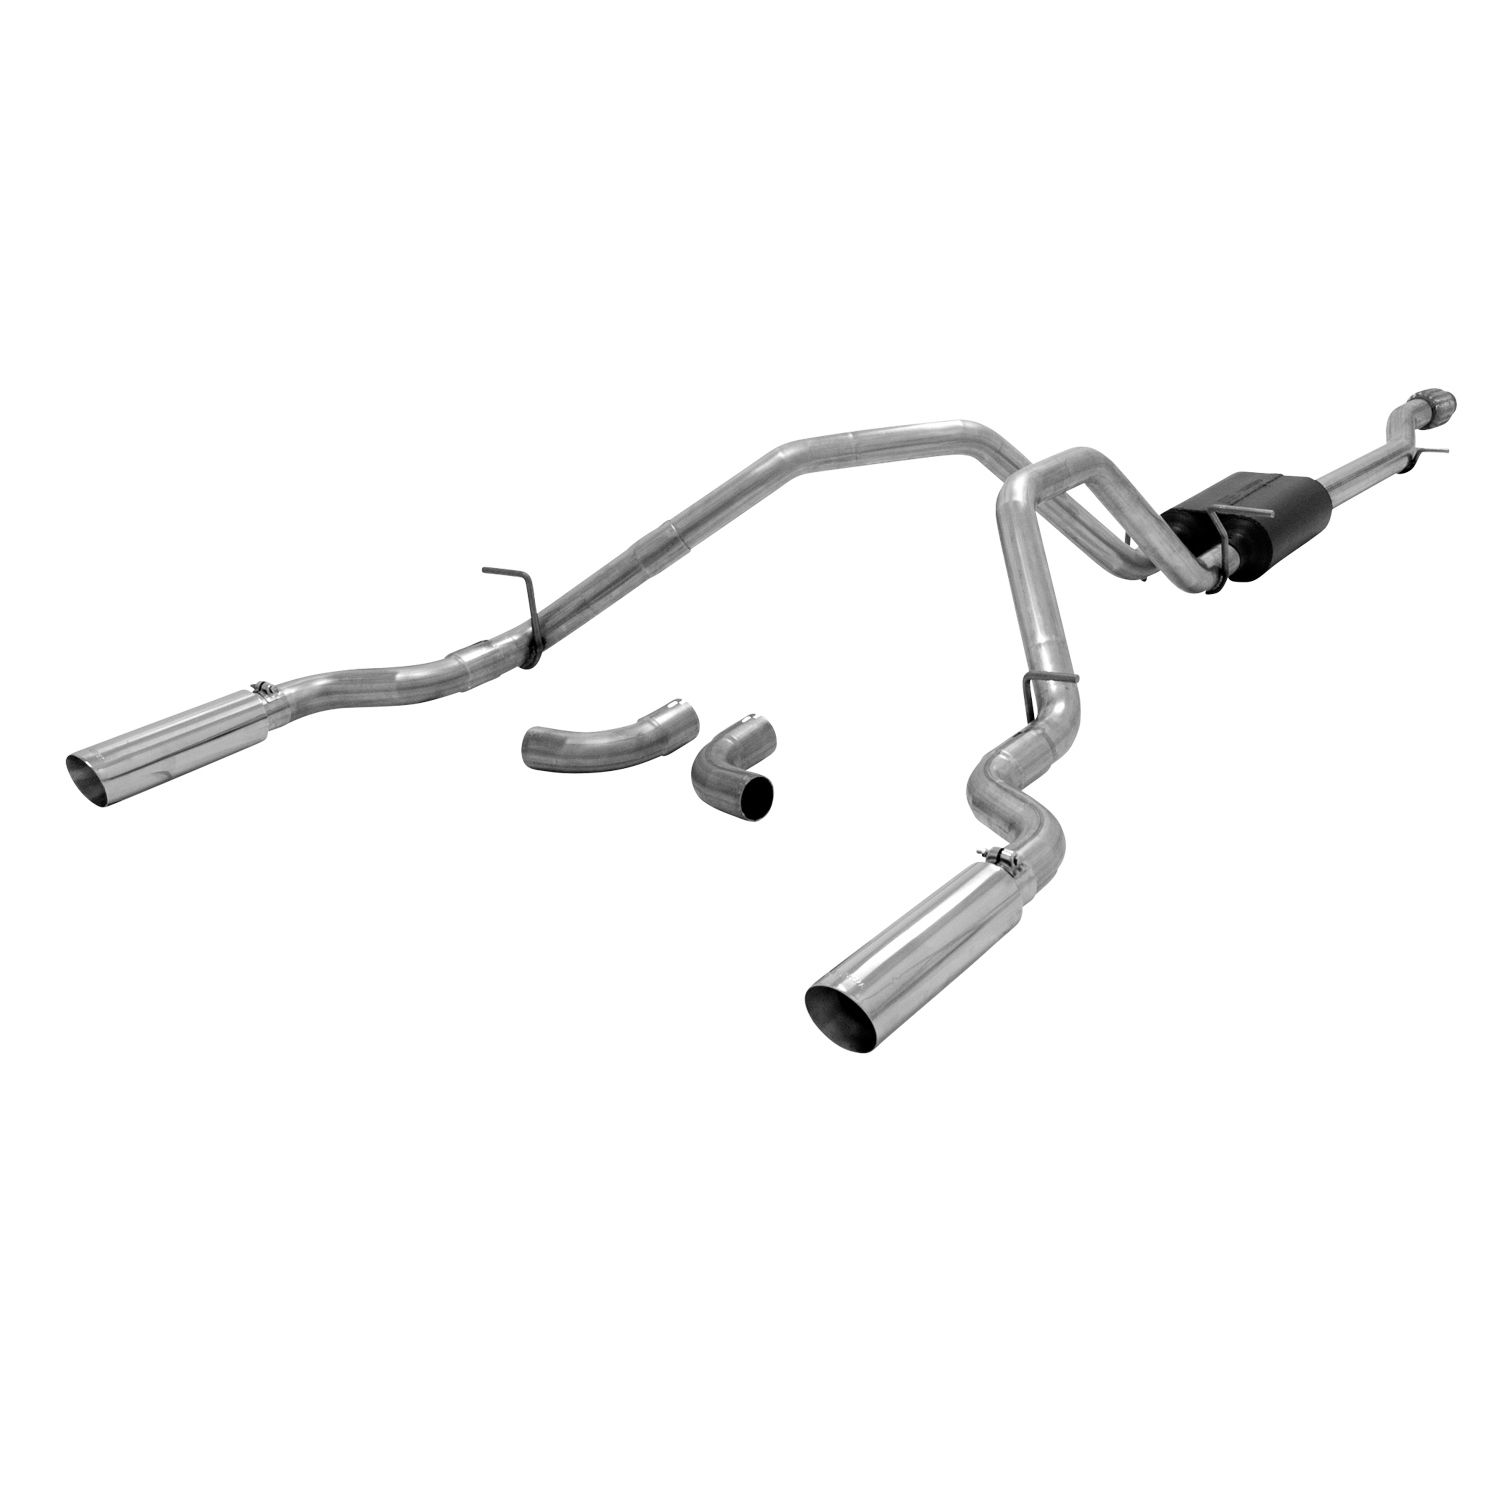 2014-2015 GMC Sierra 1500 4.3L/5.3L 4DR Crew Cab/EXT Cab Flowmaster American Thunder Cat-Back Exhaust - 817669